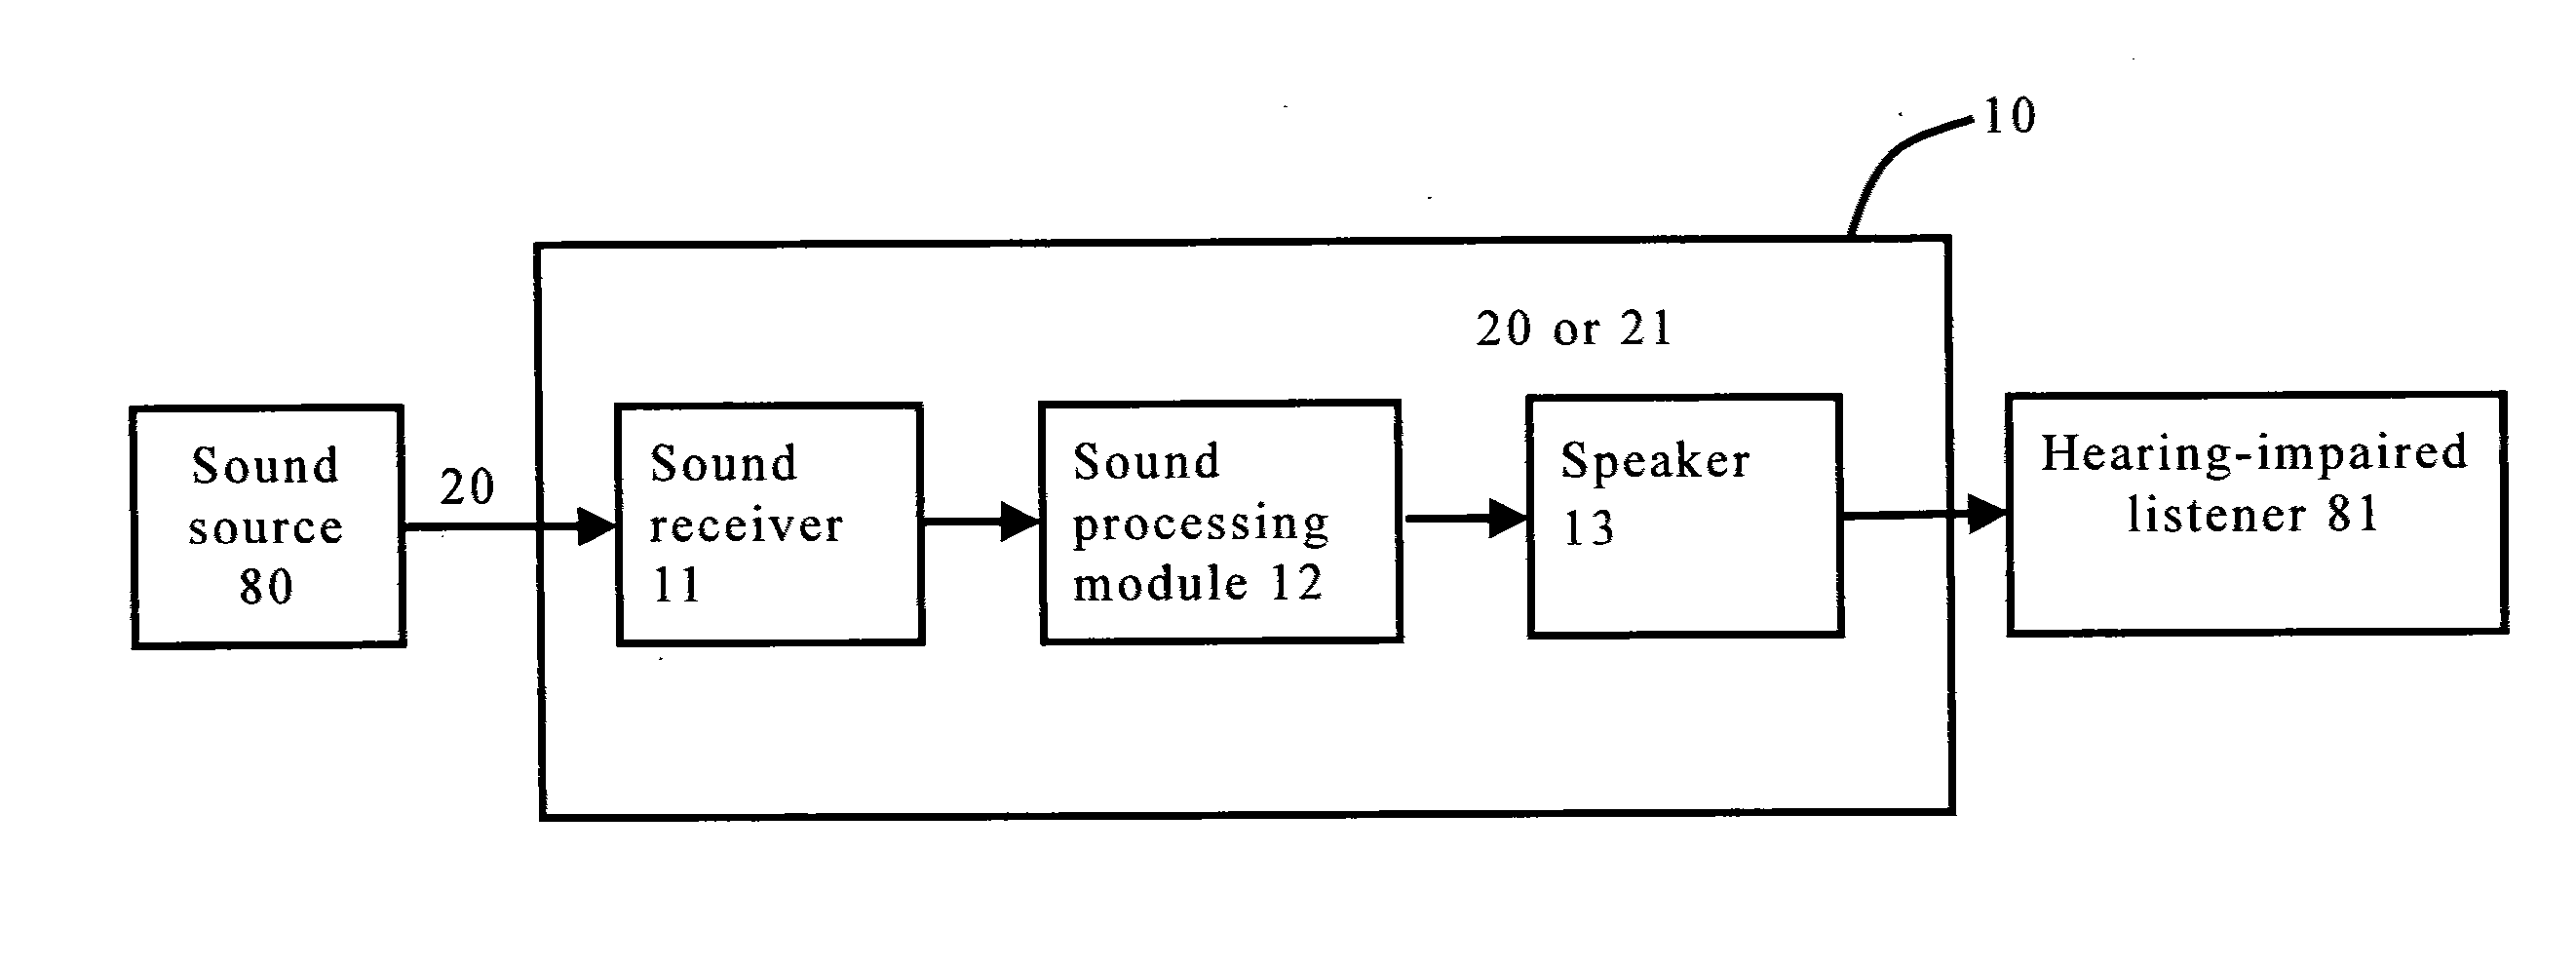 Method and hearing aid for enhancing the accuracy of sounds heard by a hearing-impaired listener